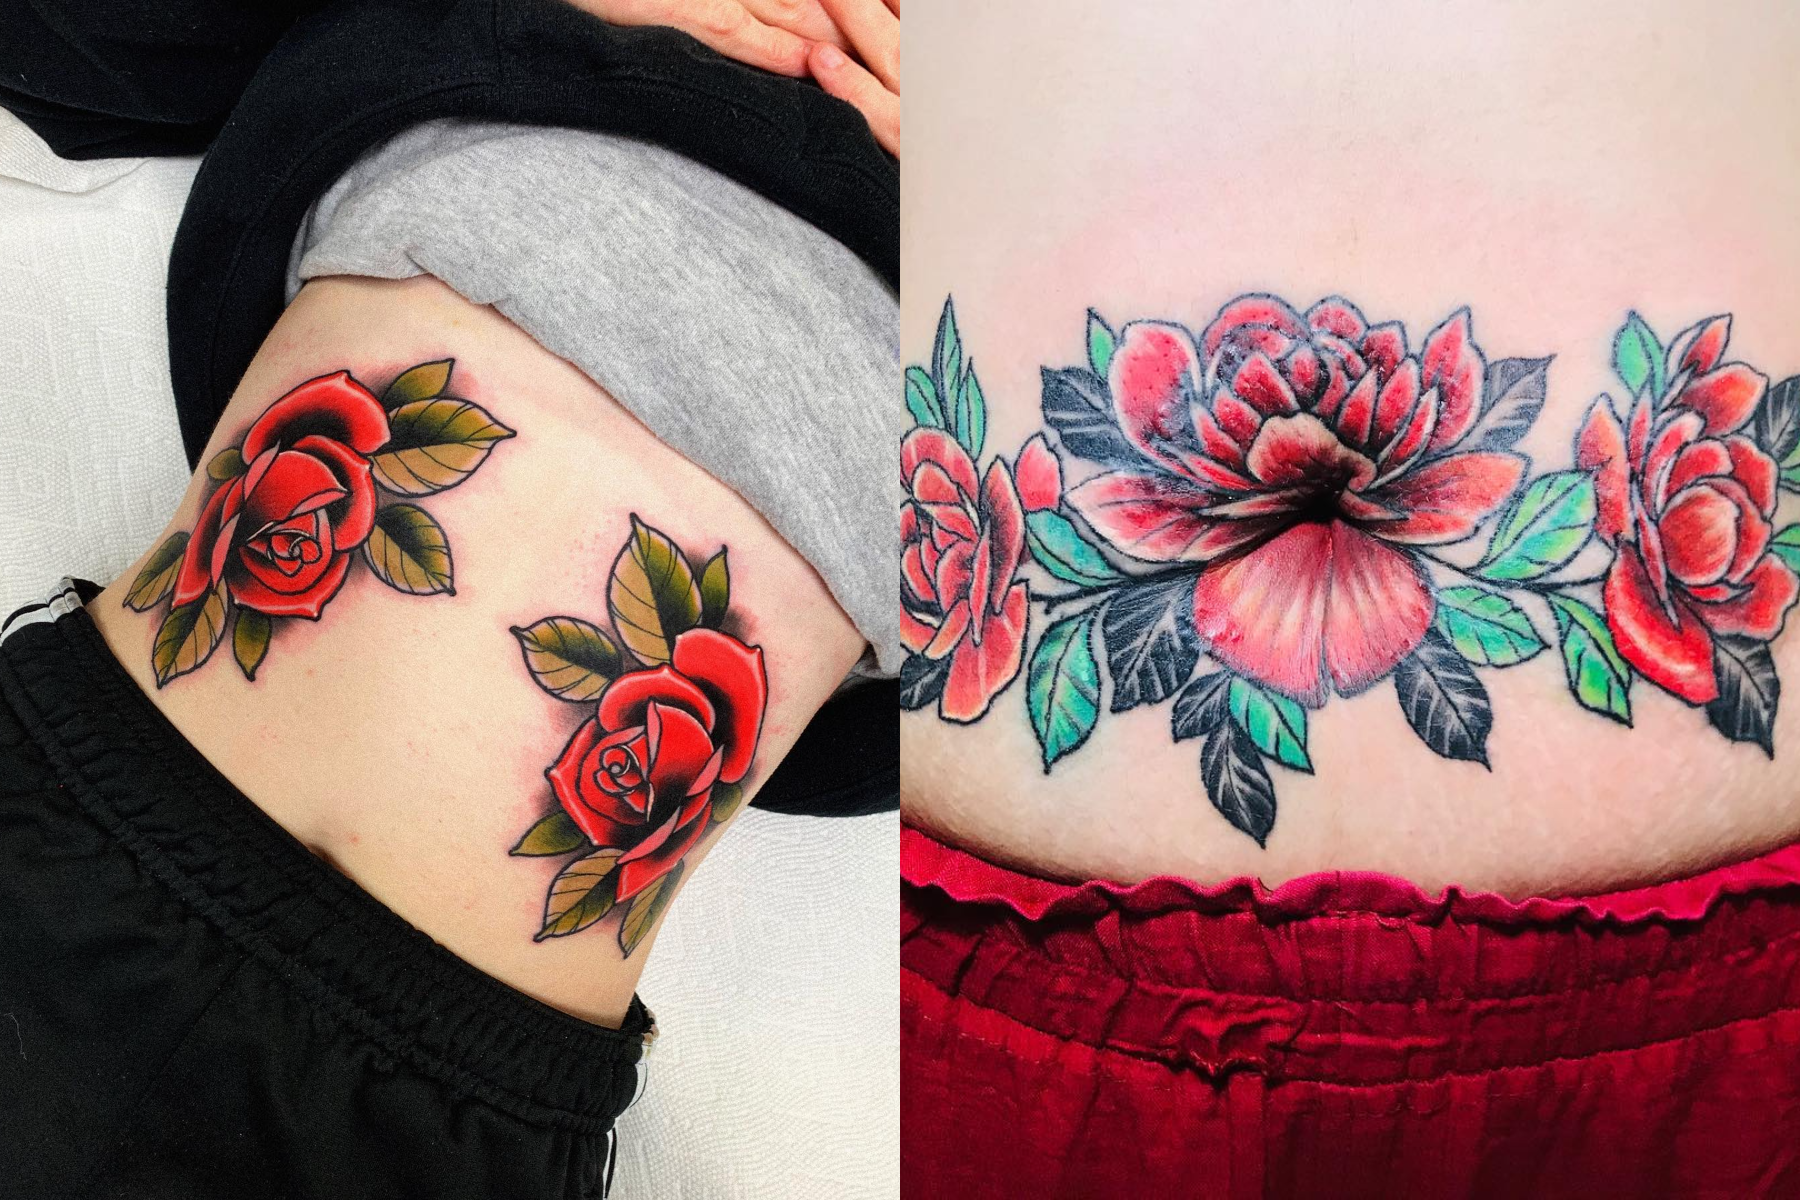 Ladies with red rose flowers tattoo